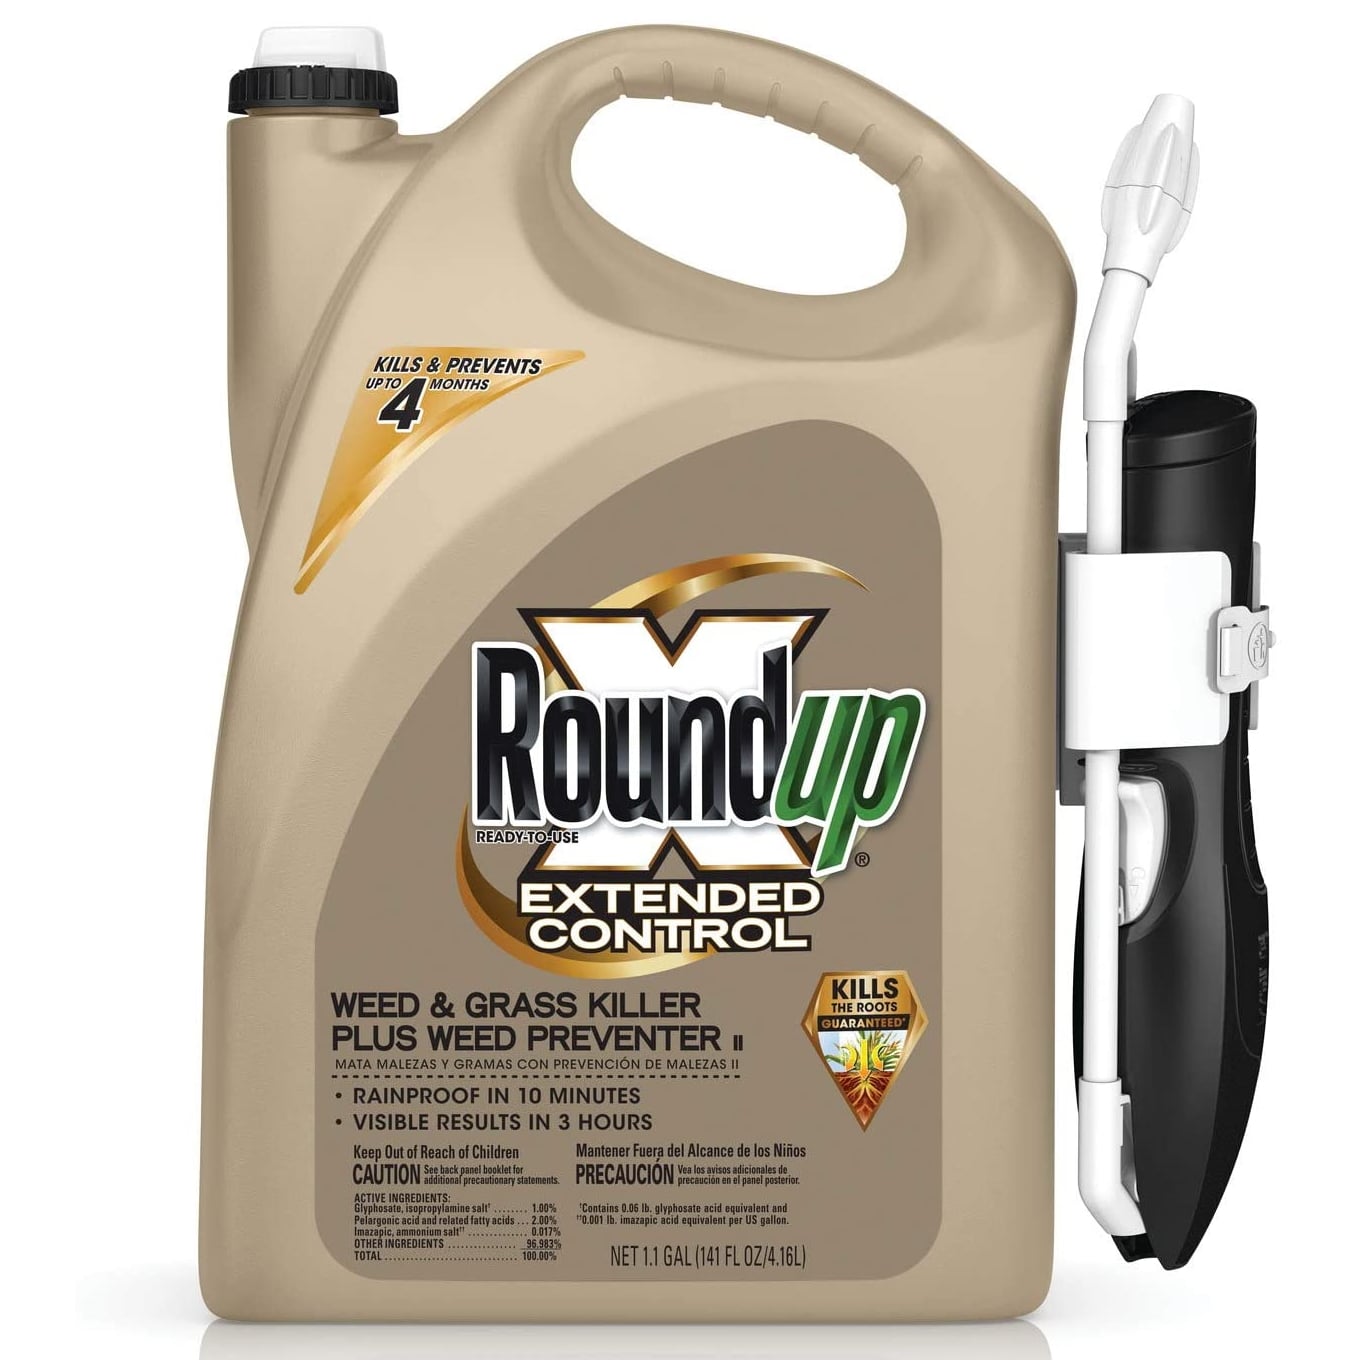 Roundup Extended Control Weed and Grass Killer